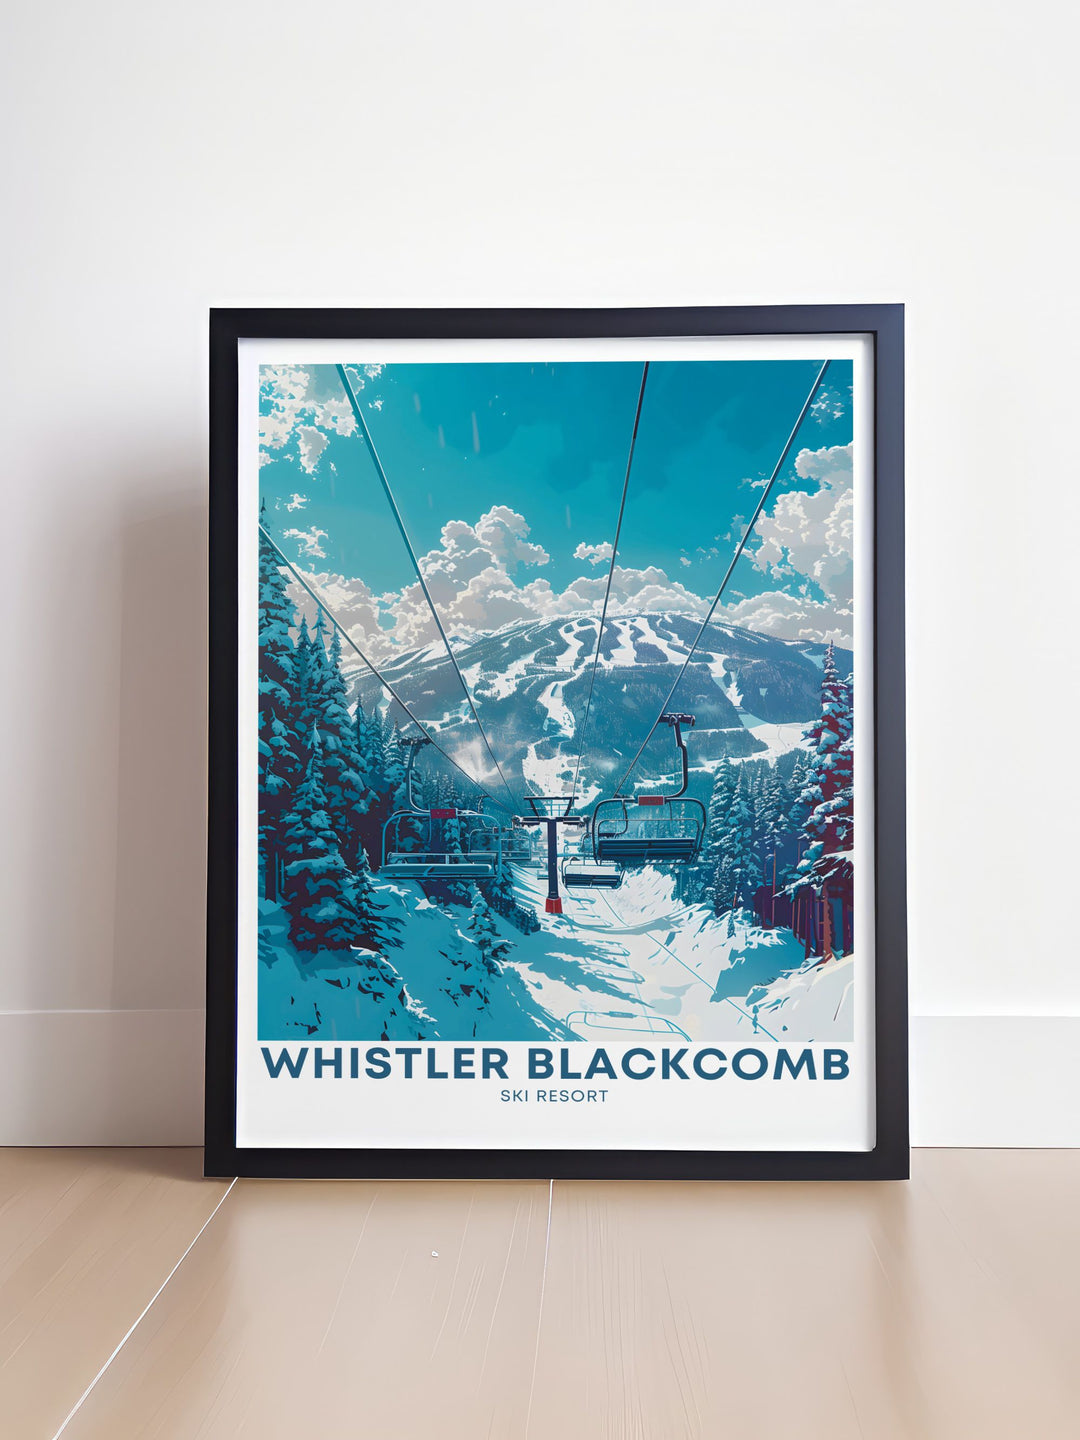 Whistler peak chair lifts framed print designed to bring the thrill of Whistler Ski Resort into your living space. This stunning piece of skiing artwork is an excellent choice for winter sports enthusiasts and collectors.